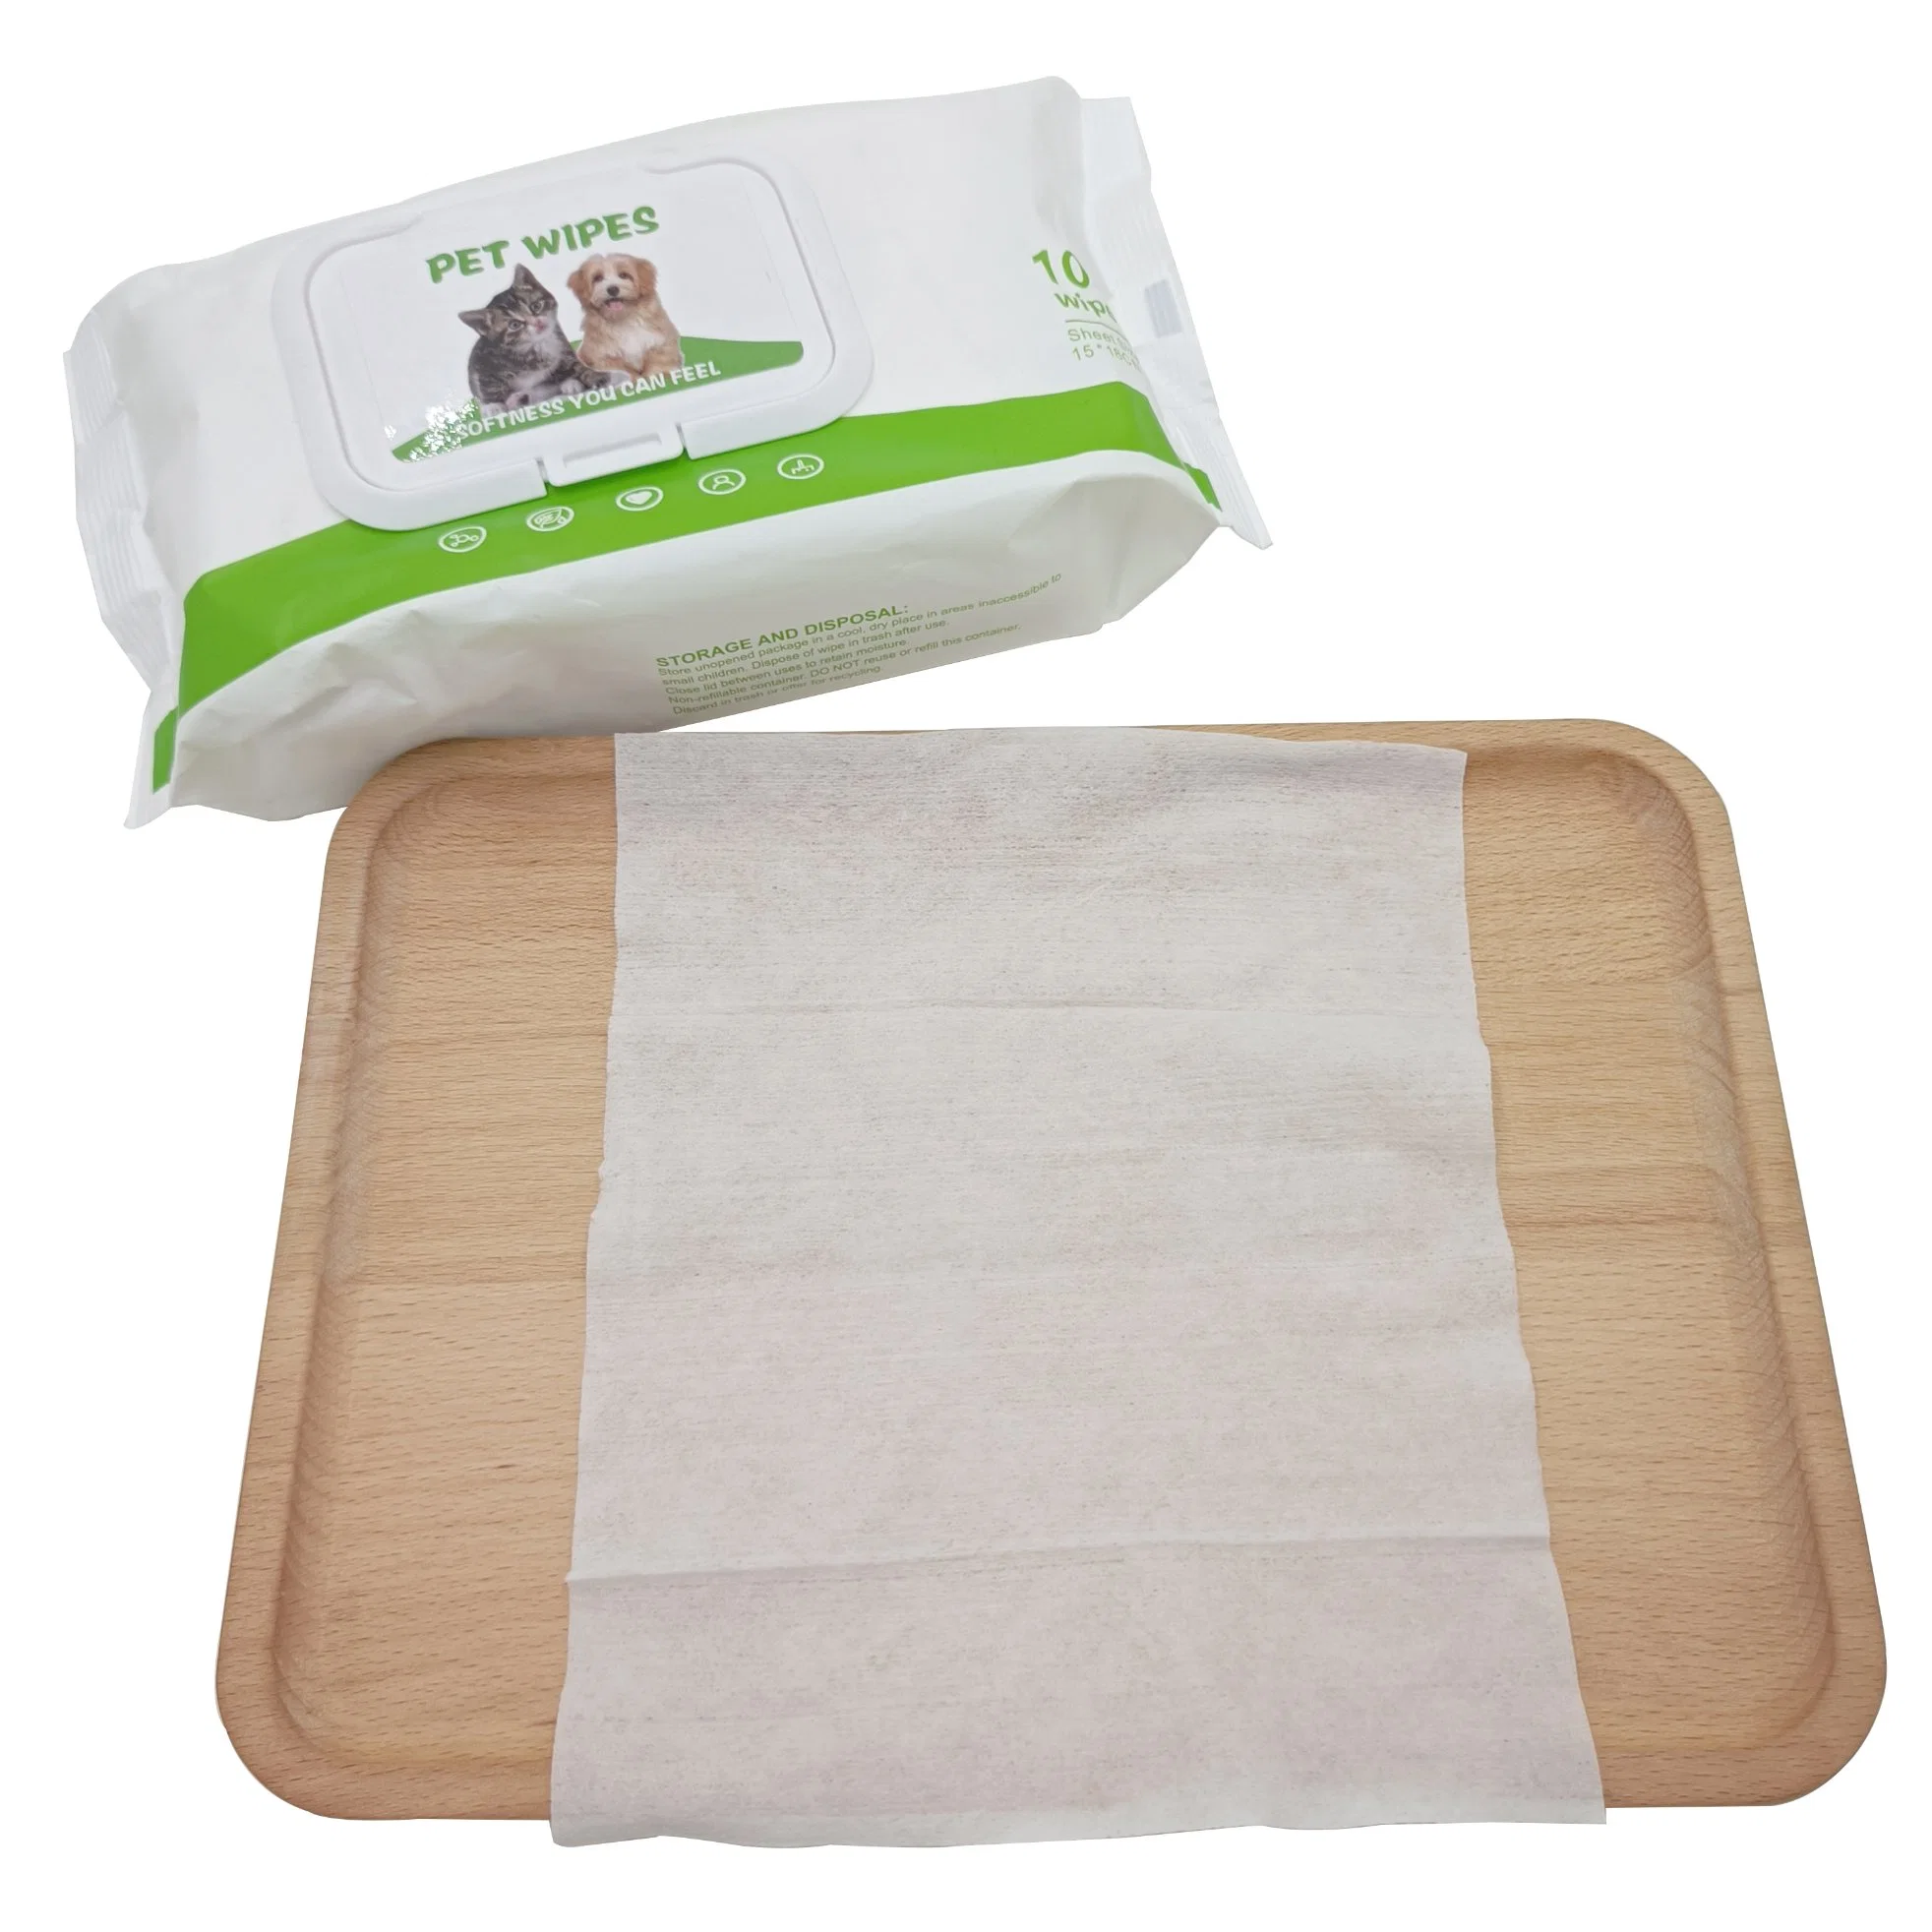 Clean Grooming Wet Wipe for Pet Aloe Pet Wet Wipes with Vitamin E and Antiseptic Dogs Puppies and Cats Cleaning Wipes